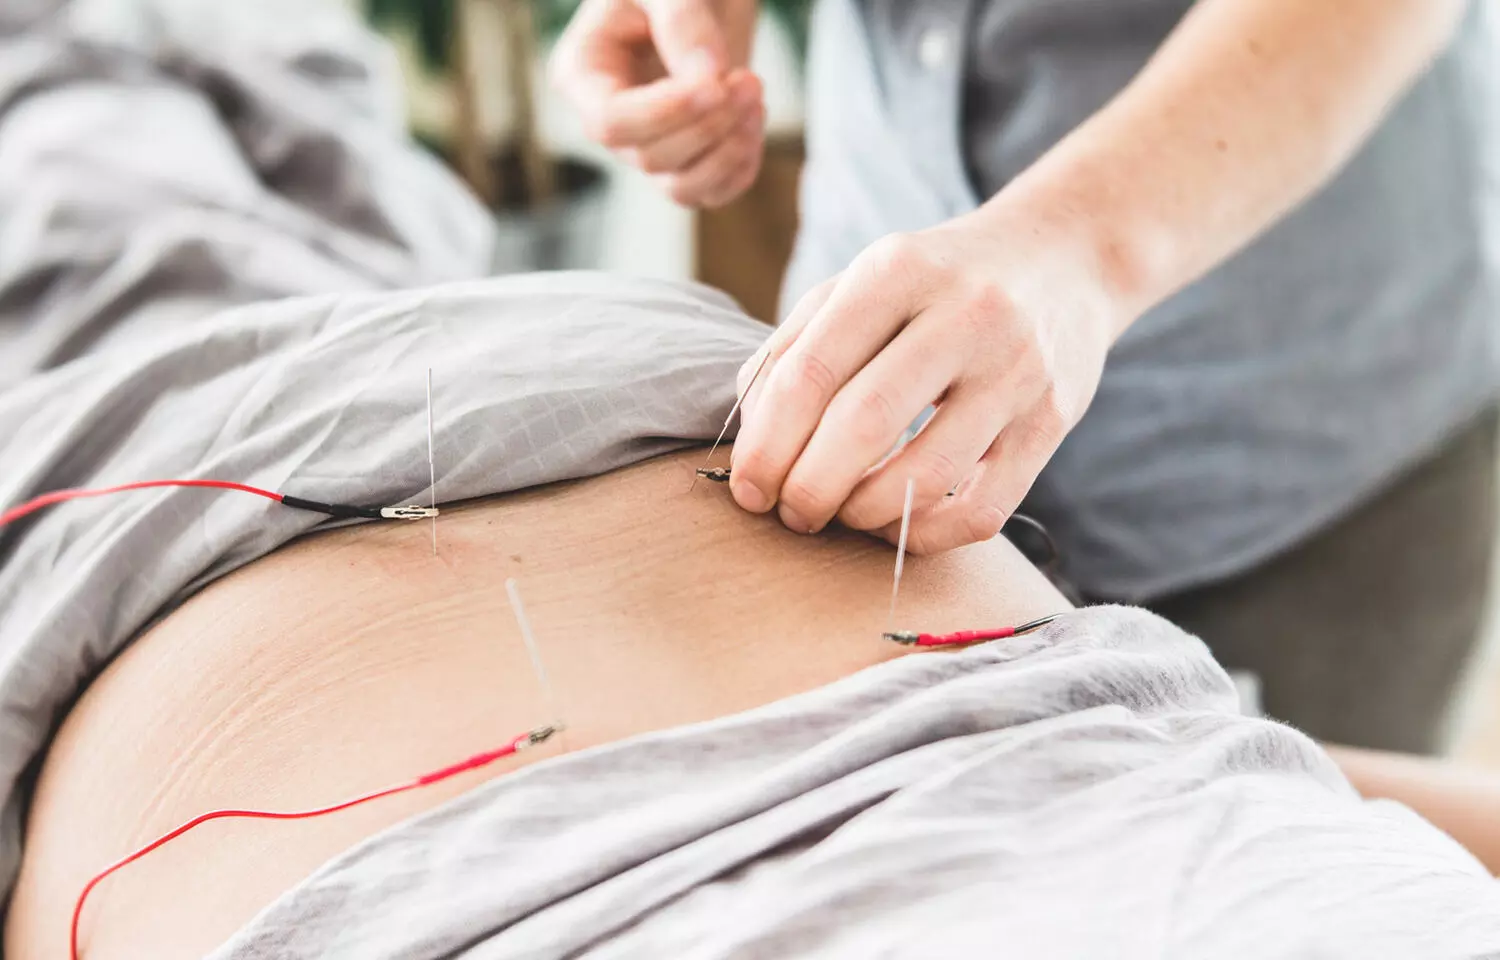 Different modalities of accupuncture reduce chronic pain in cancer survivors: JAMA